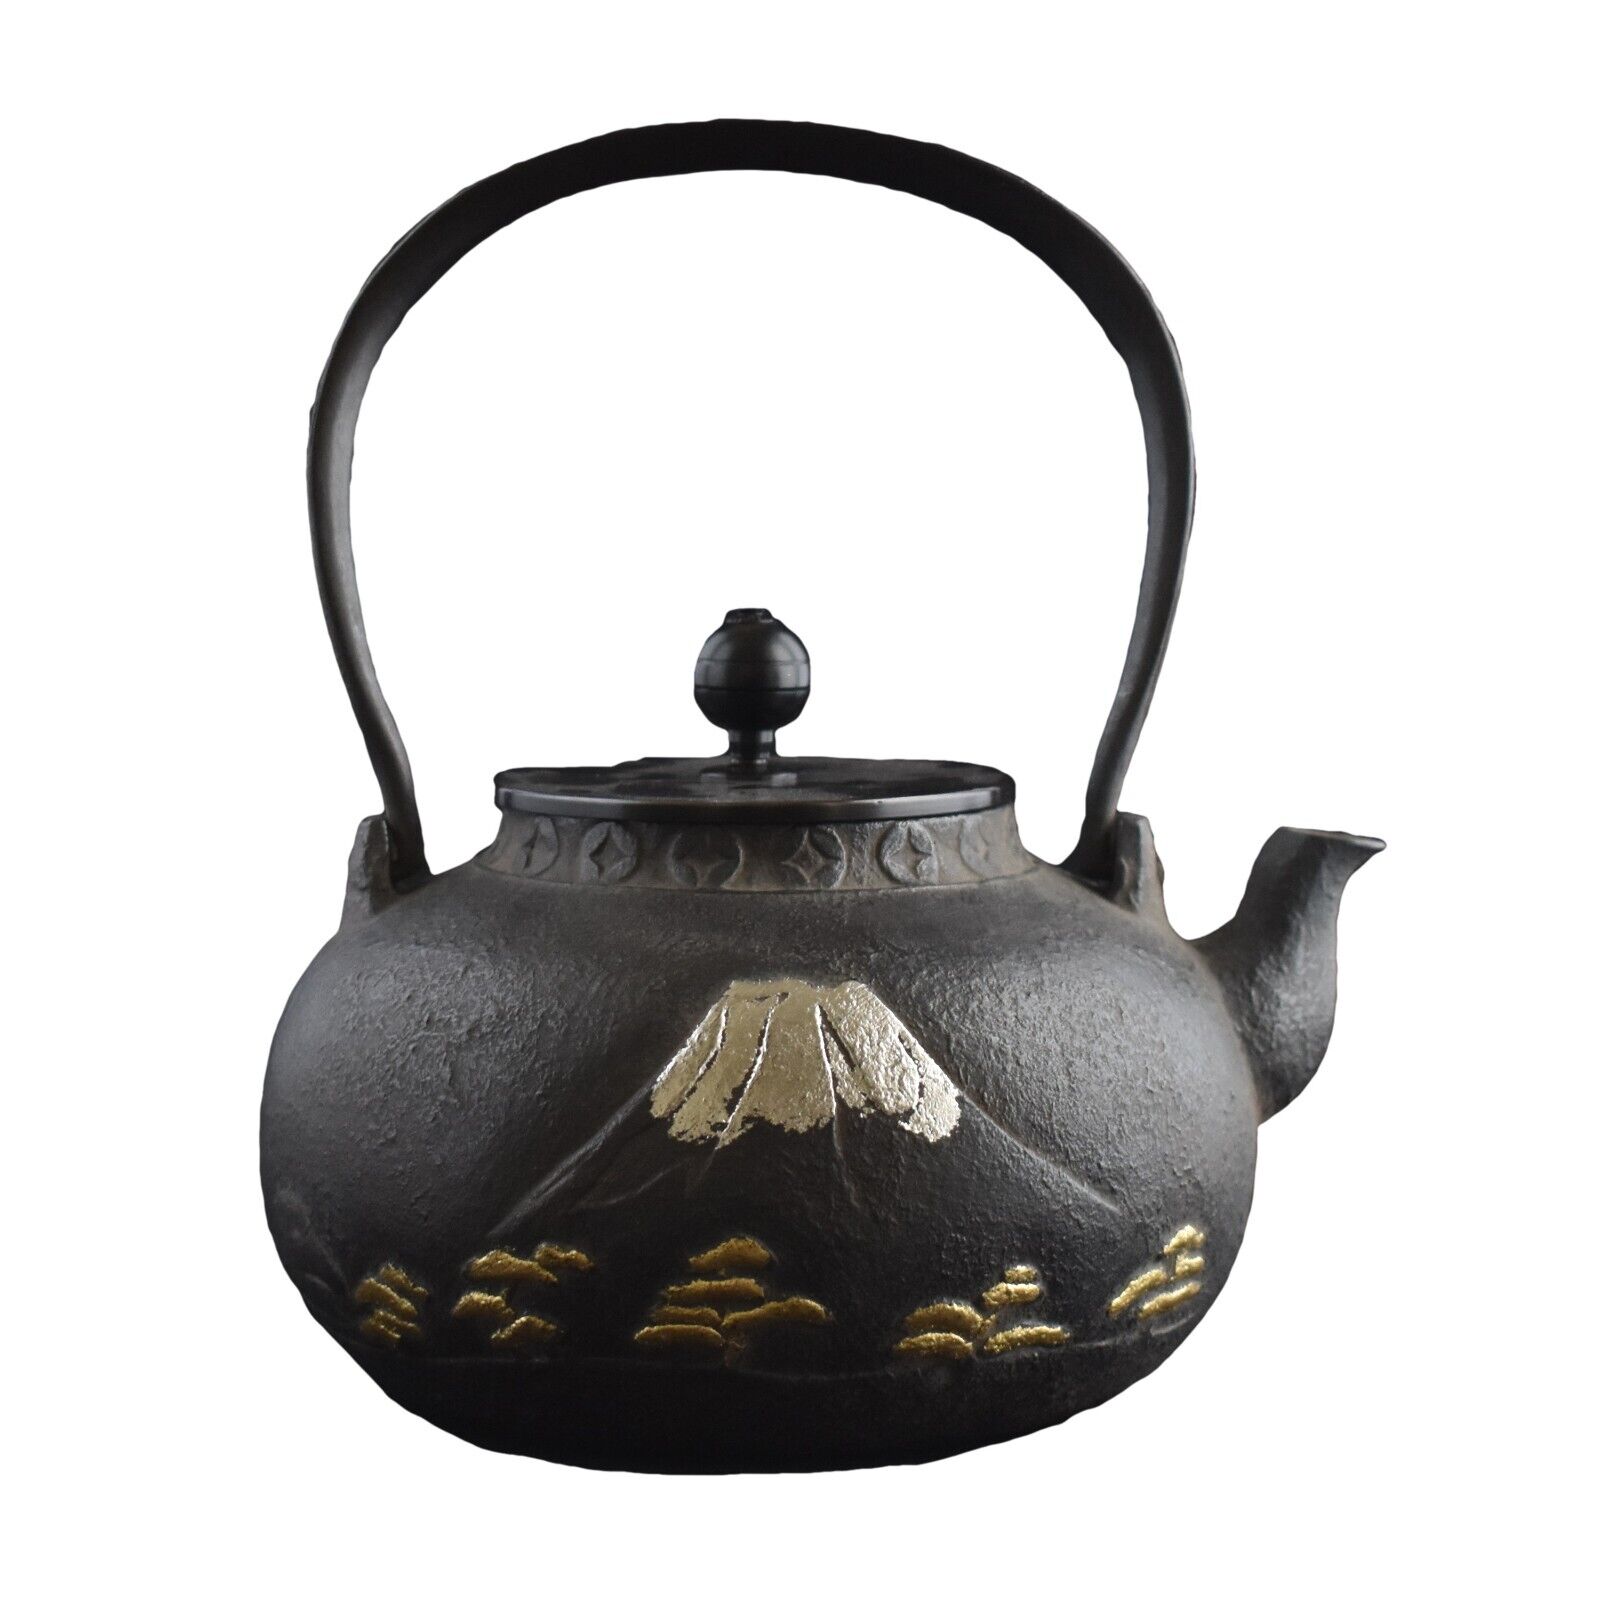 Japanese cast Southern iron, Advanced Handmade by celebrities,1.2L 